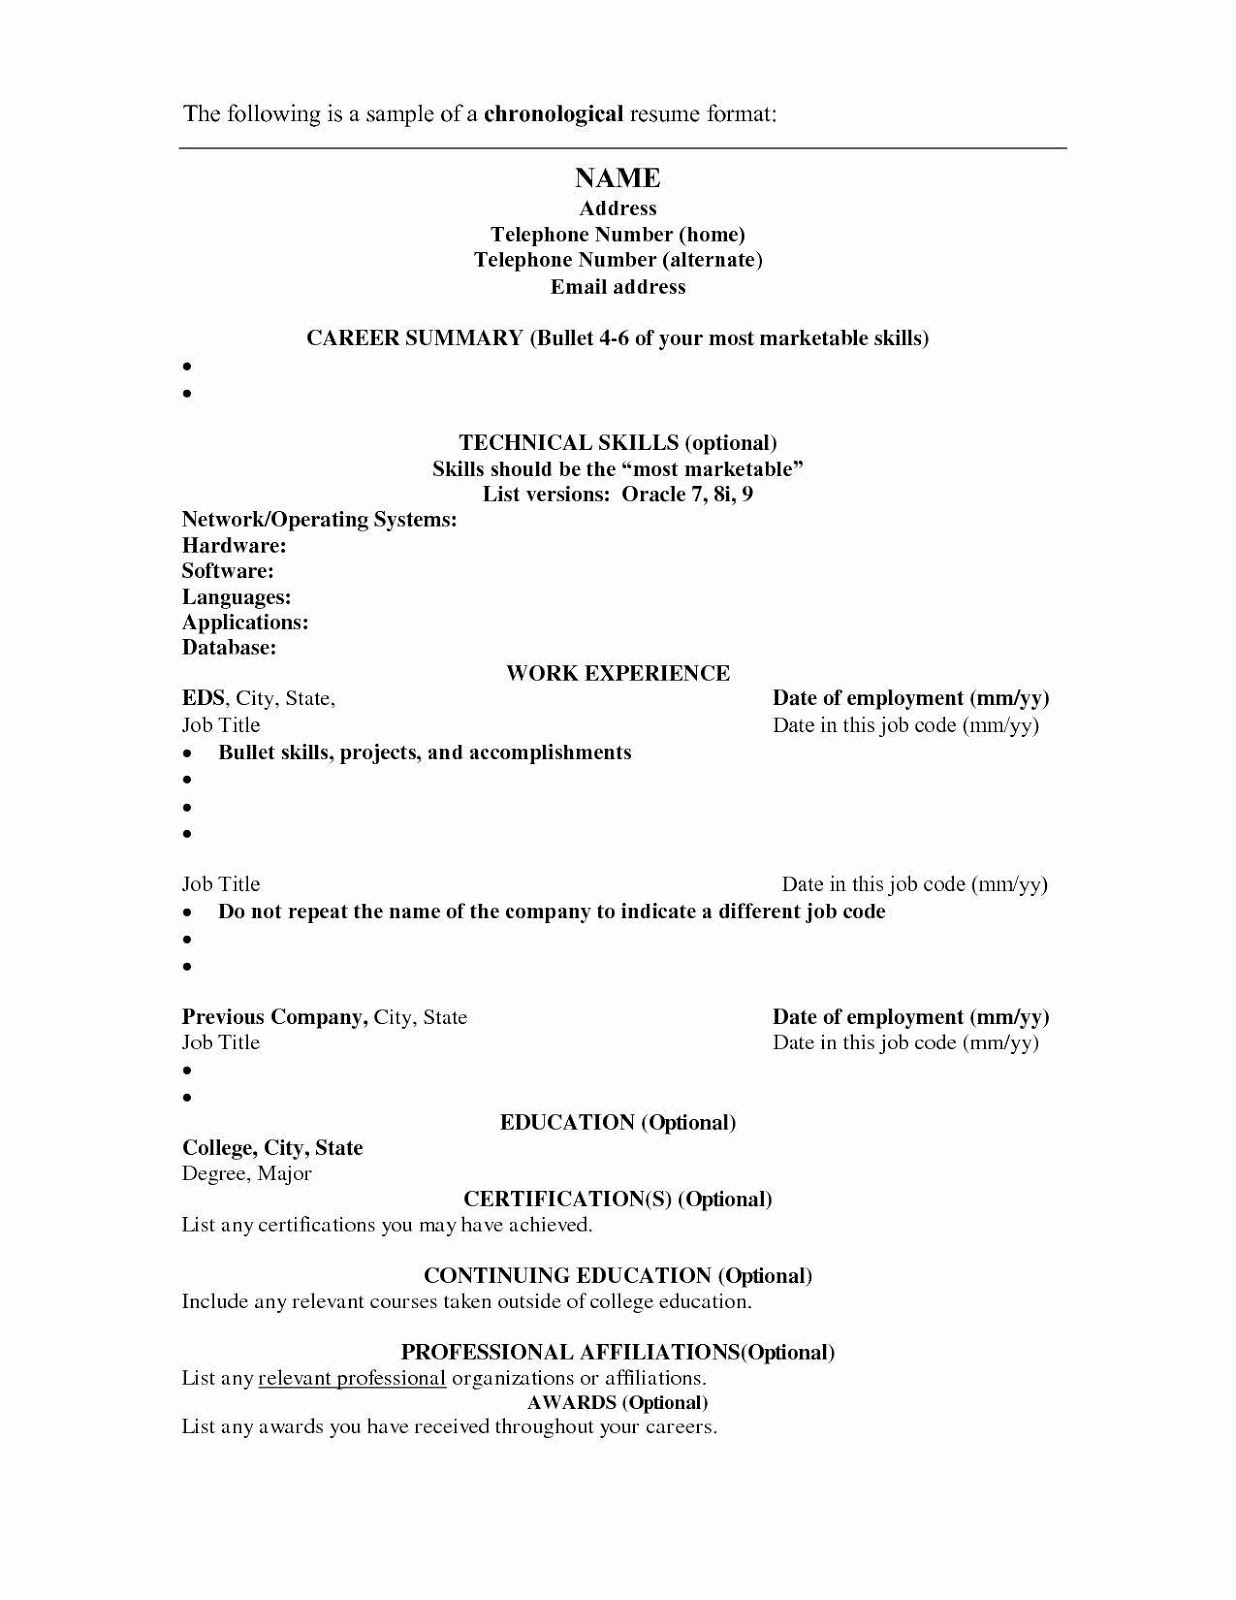 example resume for mock interview   91